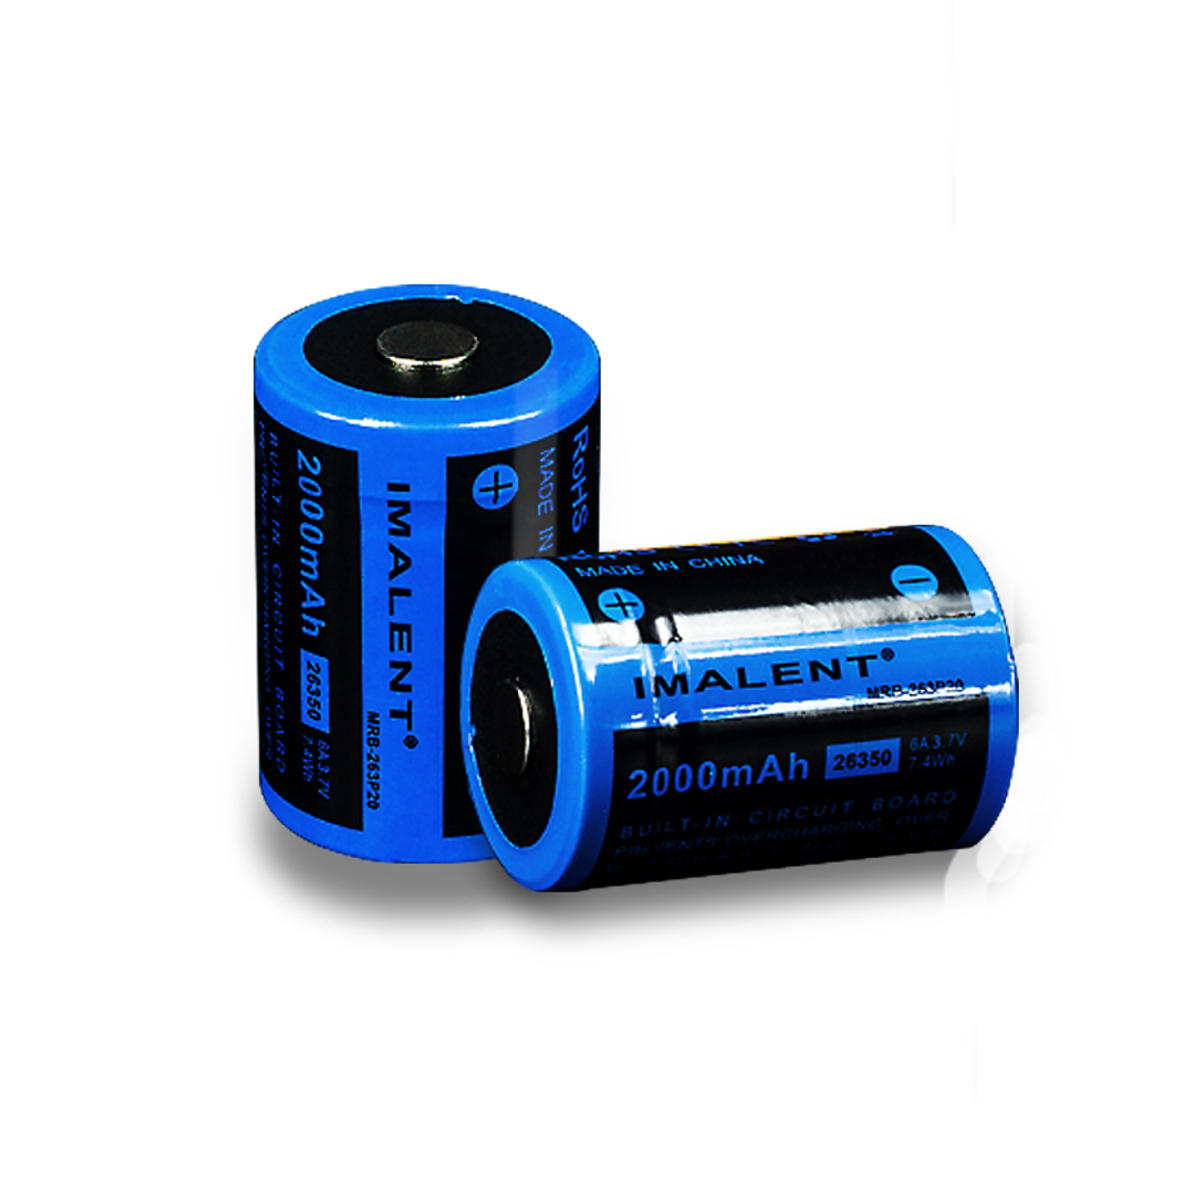 best price,imalent,mrb,263p20,2000mah,26350,battery,coupon,price,discount